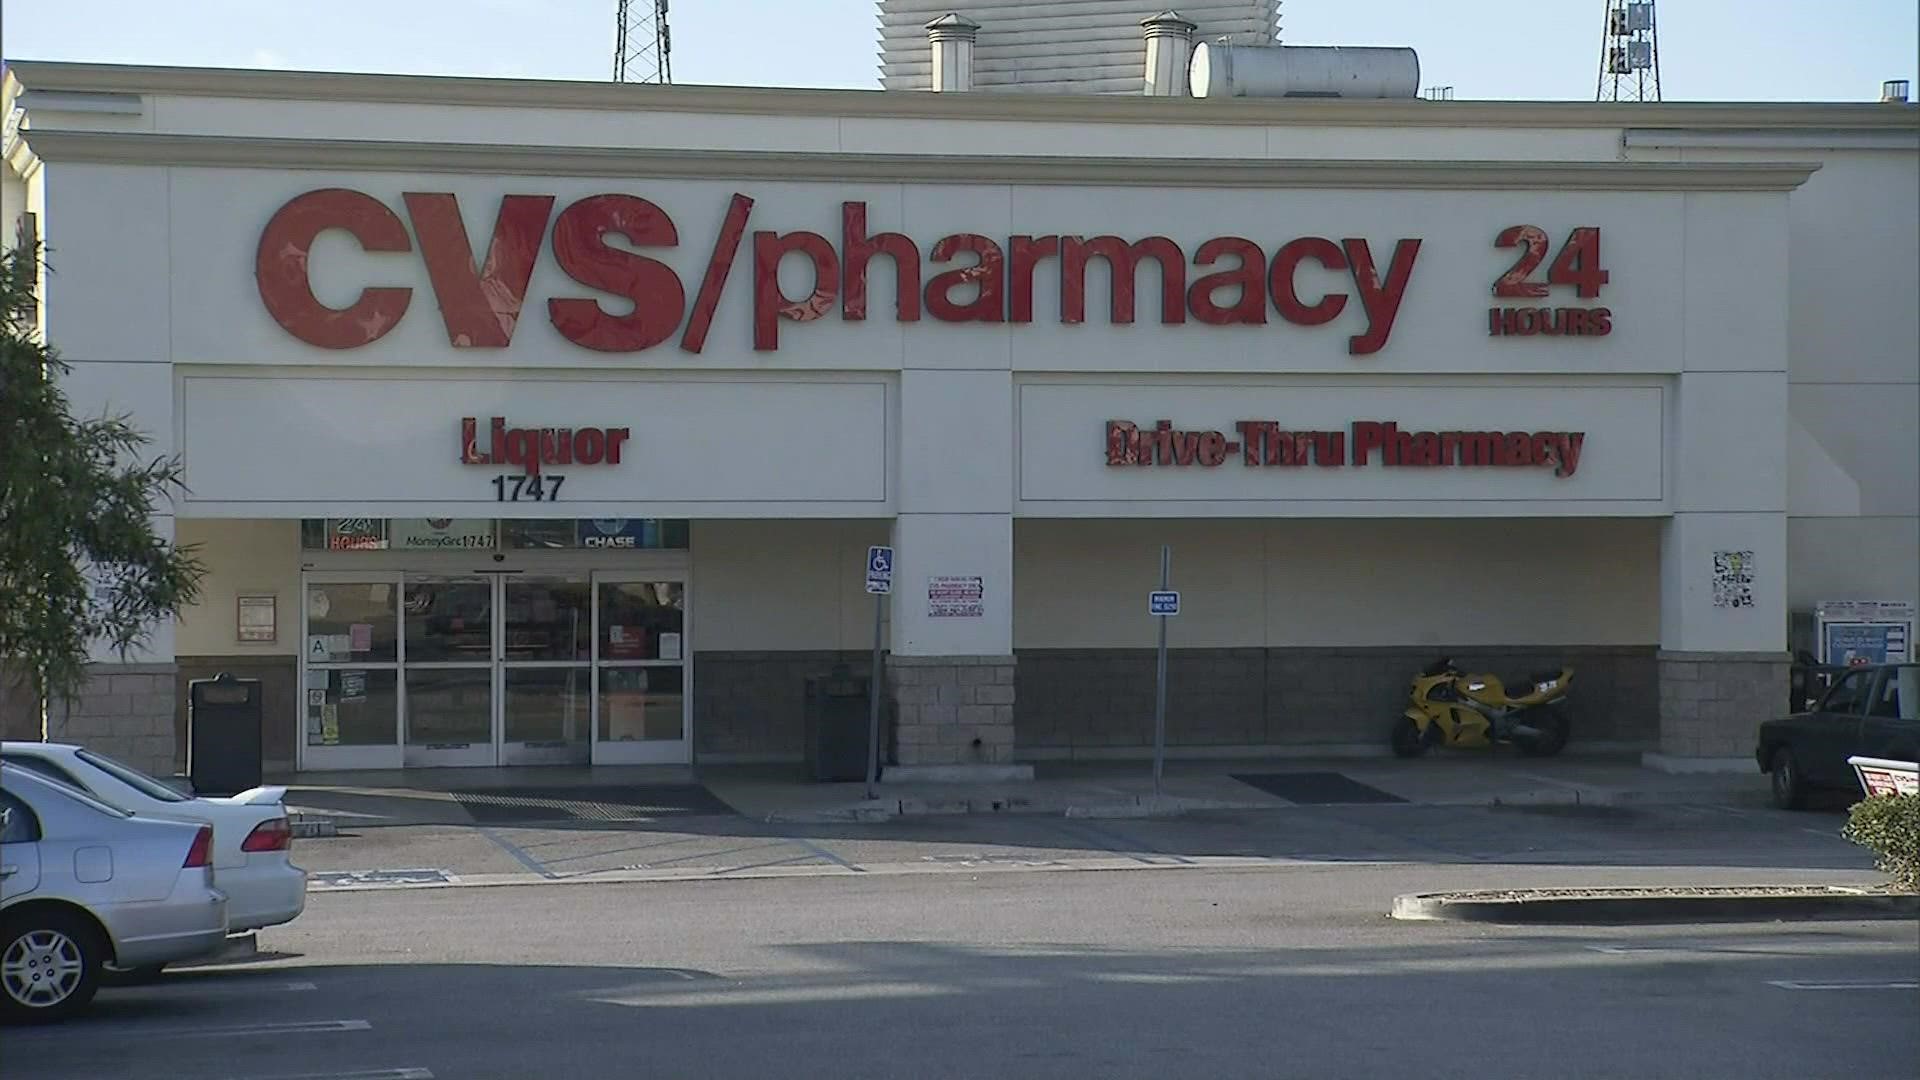 CVS said it is looking to reduce store count density in some locations, with plans to close about 900 drugstores.